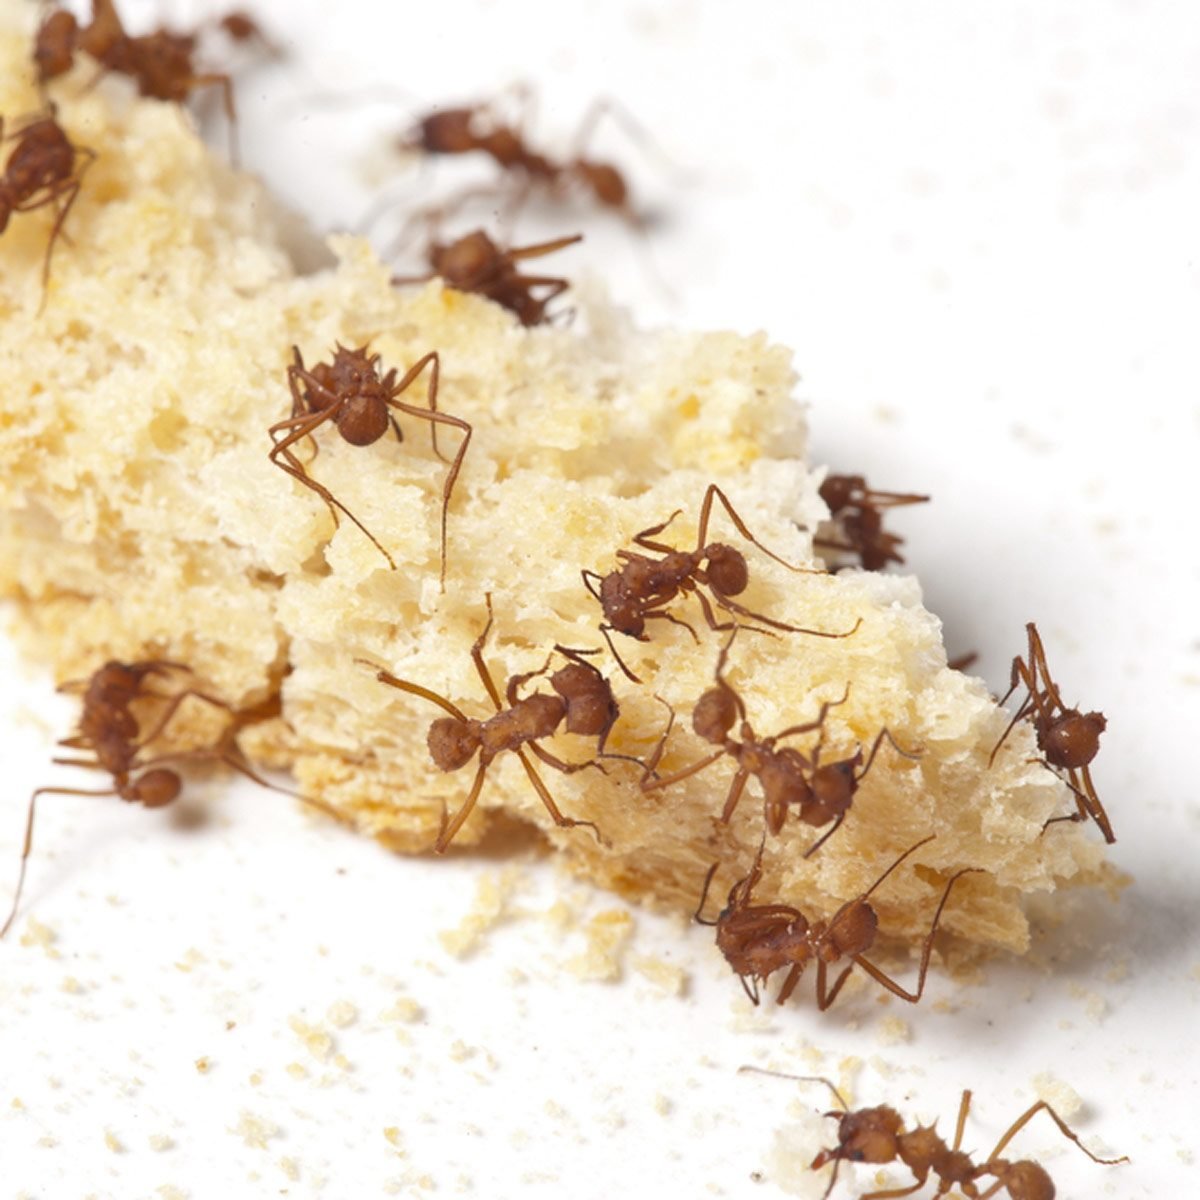 How Does an Ant Know There are Crumbs on Your Floor?